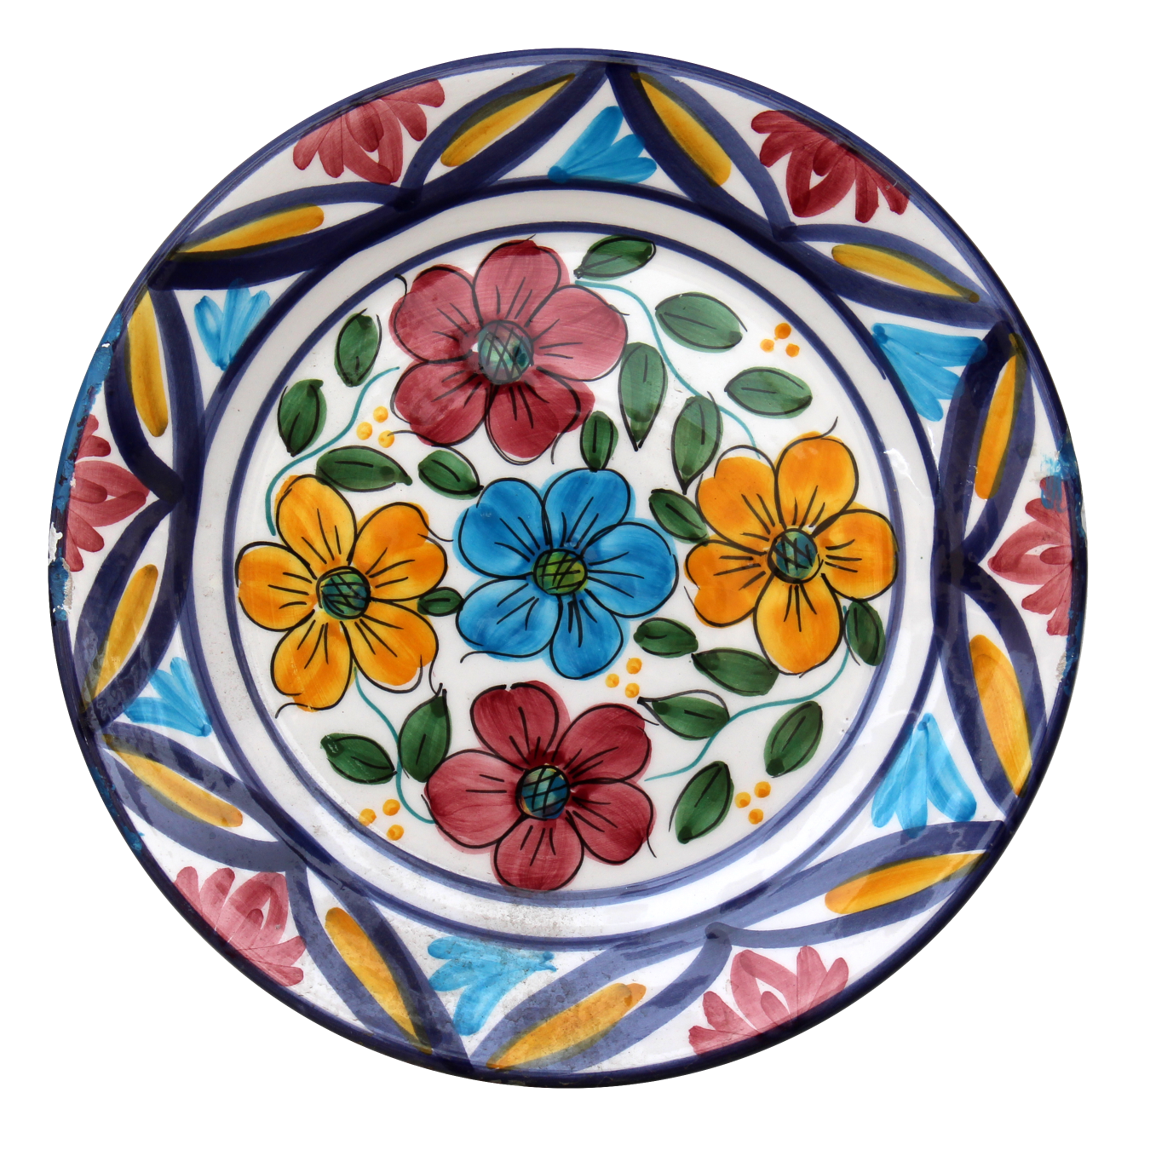 A plate without reflection or rotational symmetry.